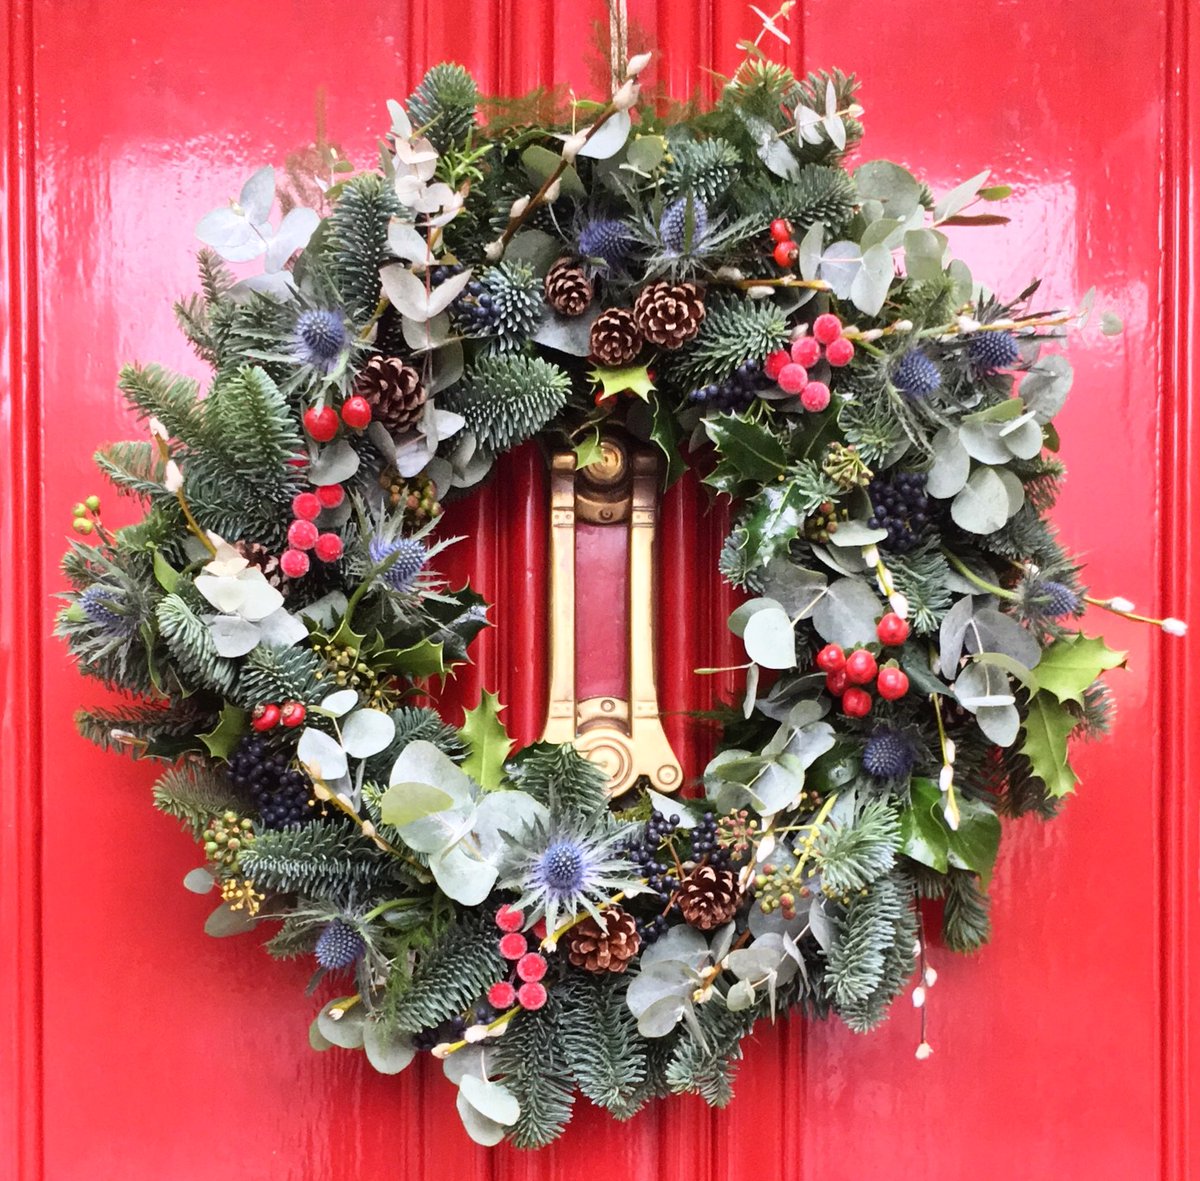 Christmas Door Wreaths🎄 ✨✨✨
Made to order or come and join me on a workshop throughout #December! Learn how to make a wreath from scratch 🎄#newport #christmas #wreaths #pembs #florist #doorwreath #spruce #festive #cymru #Nadolig #fishguard #northpembs! Get involved! ✨✨